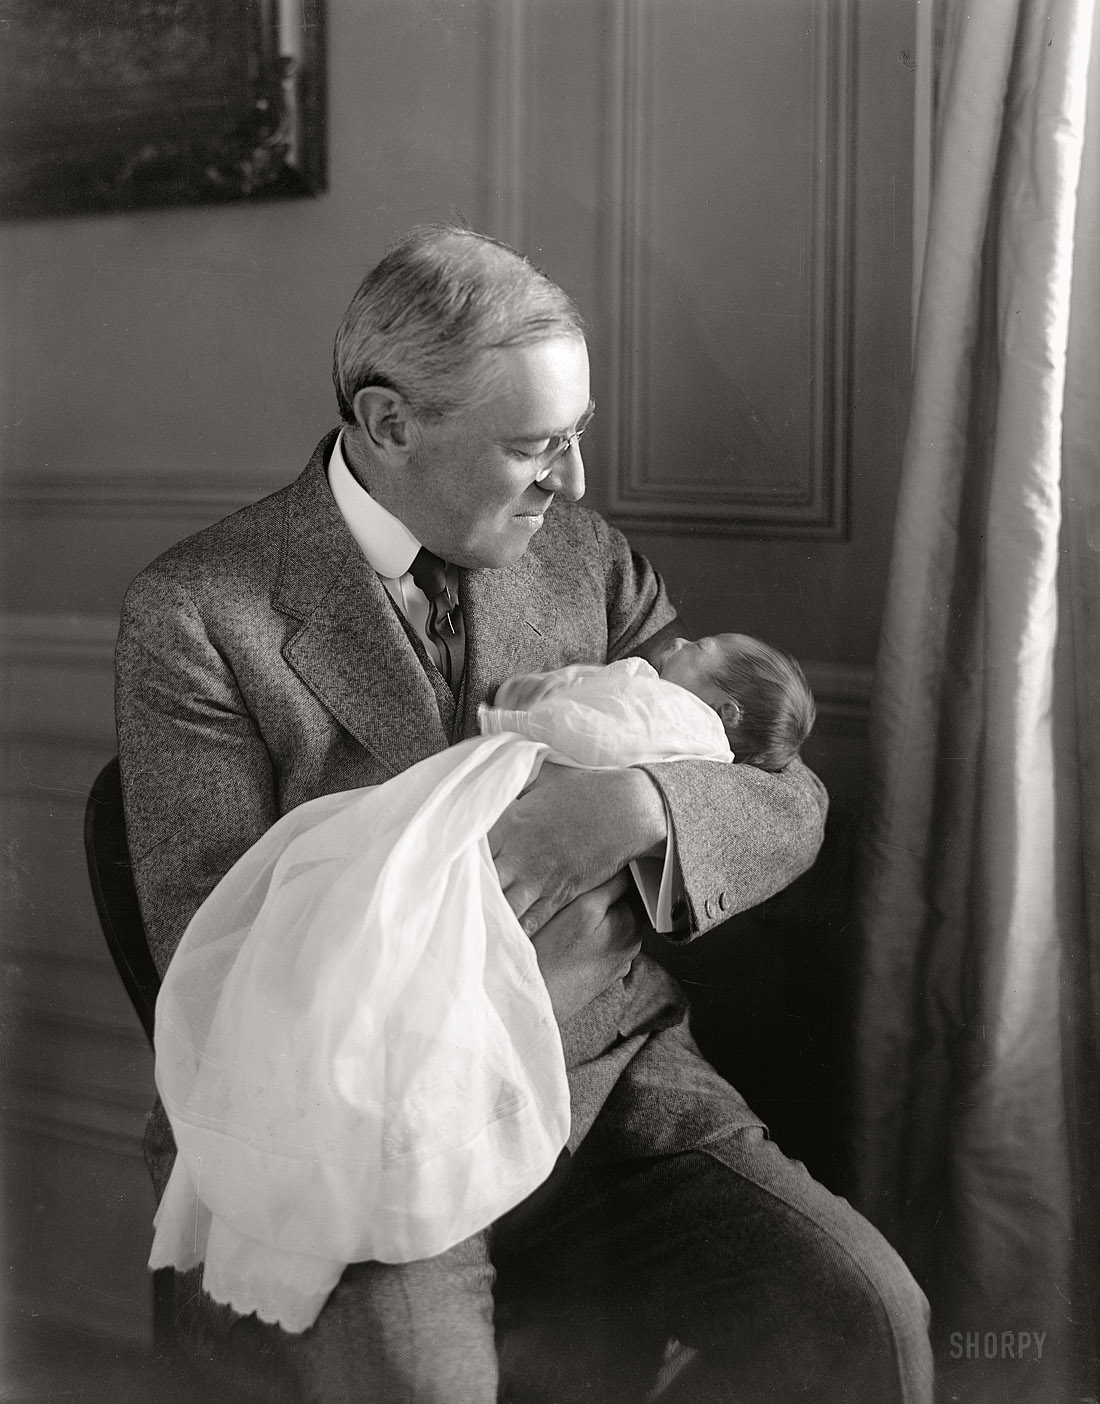 "Francis Sayre Jr., baby, with Woodrow Wilson." The President and new grandson in 1915, less than a year after the death of his wife Ellen. View full size.